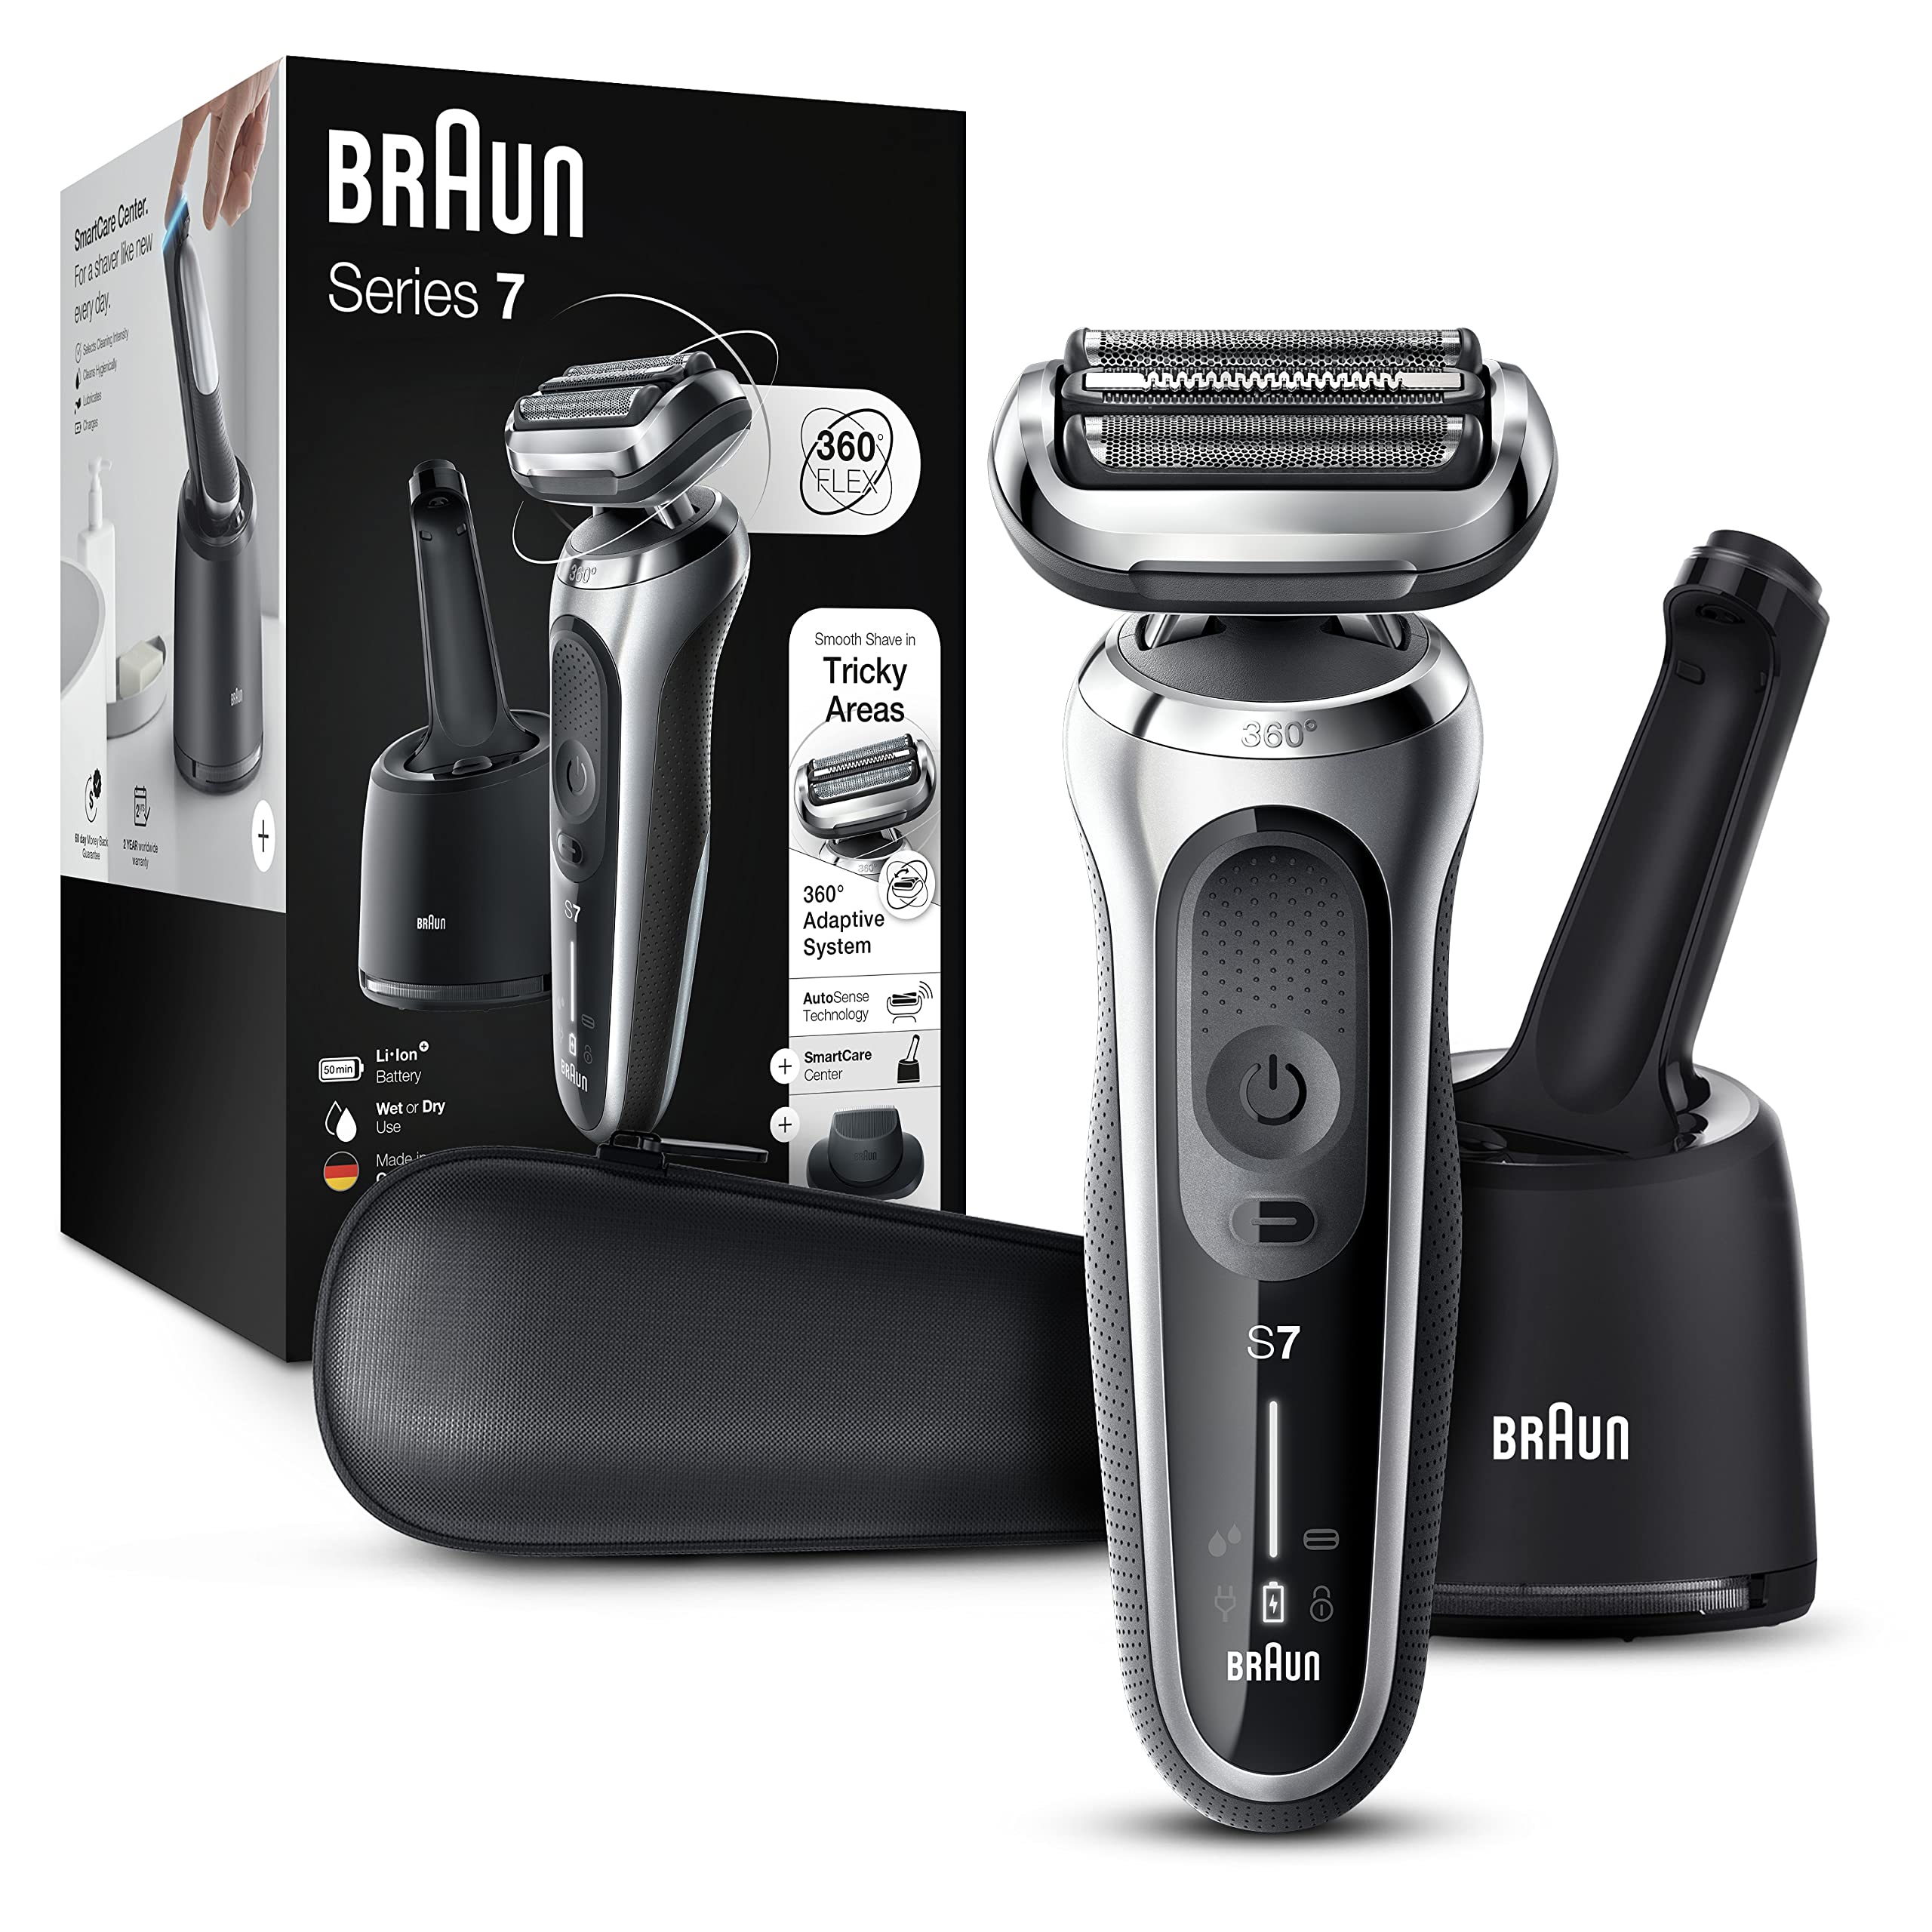 Can The Braun 3090 Really Give You a Smooth Shave: Yes, Here